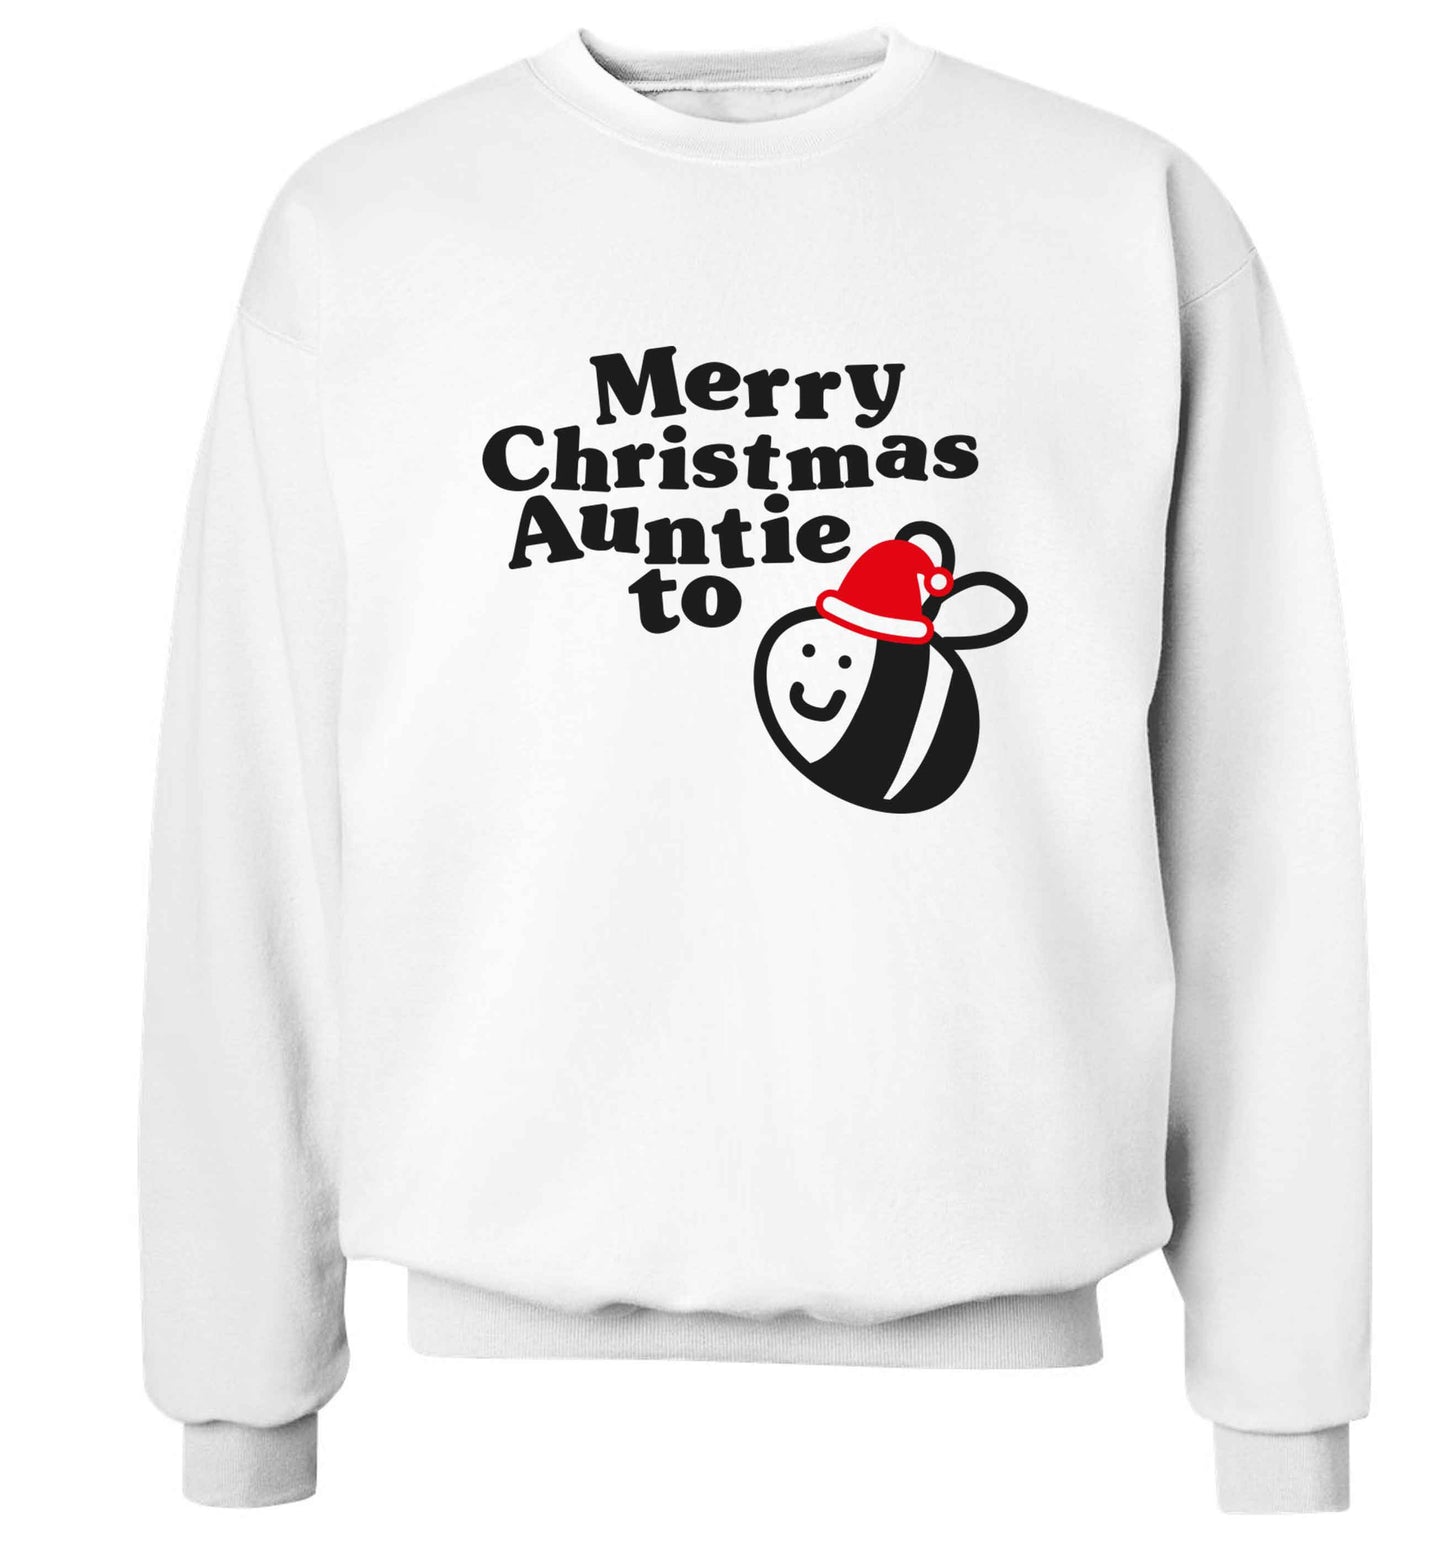 Merry Christmas auntie to be Adult's unisex white Sweater 2XL